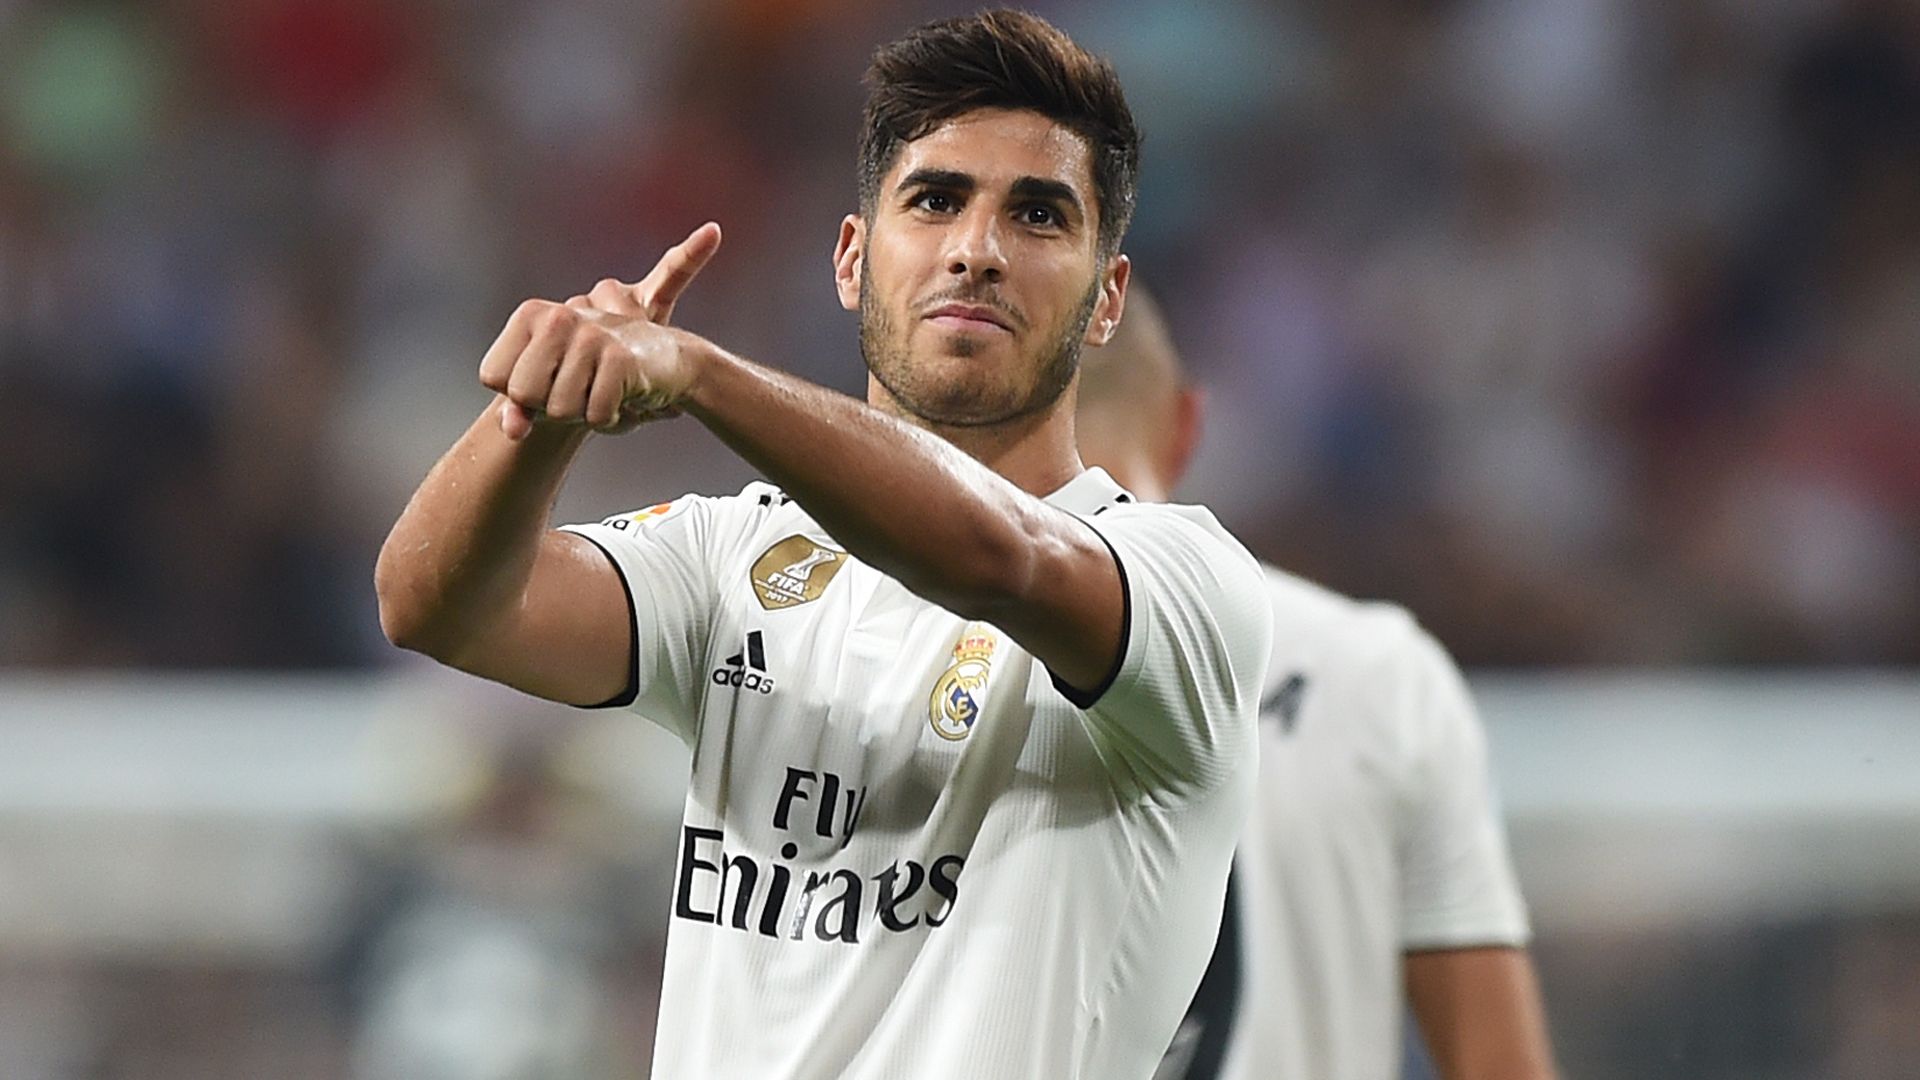 La Liga reporter claims Liverpool FC want to sign 22-year-old l Marco Asensio - Bóng Đá